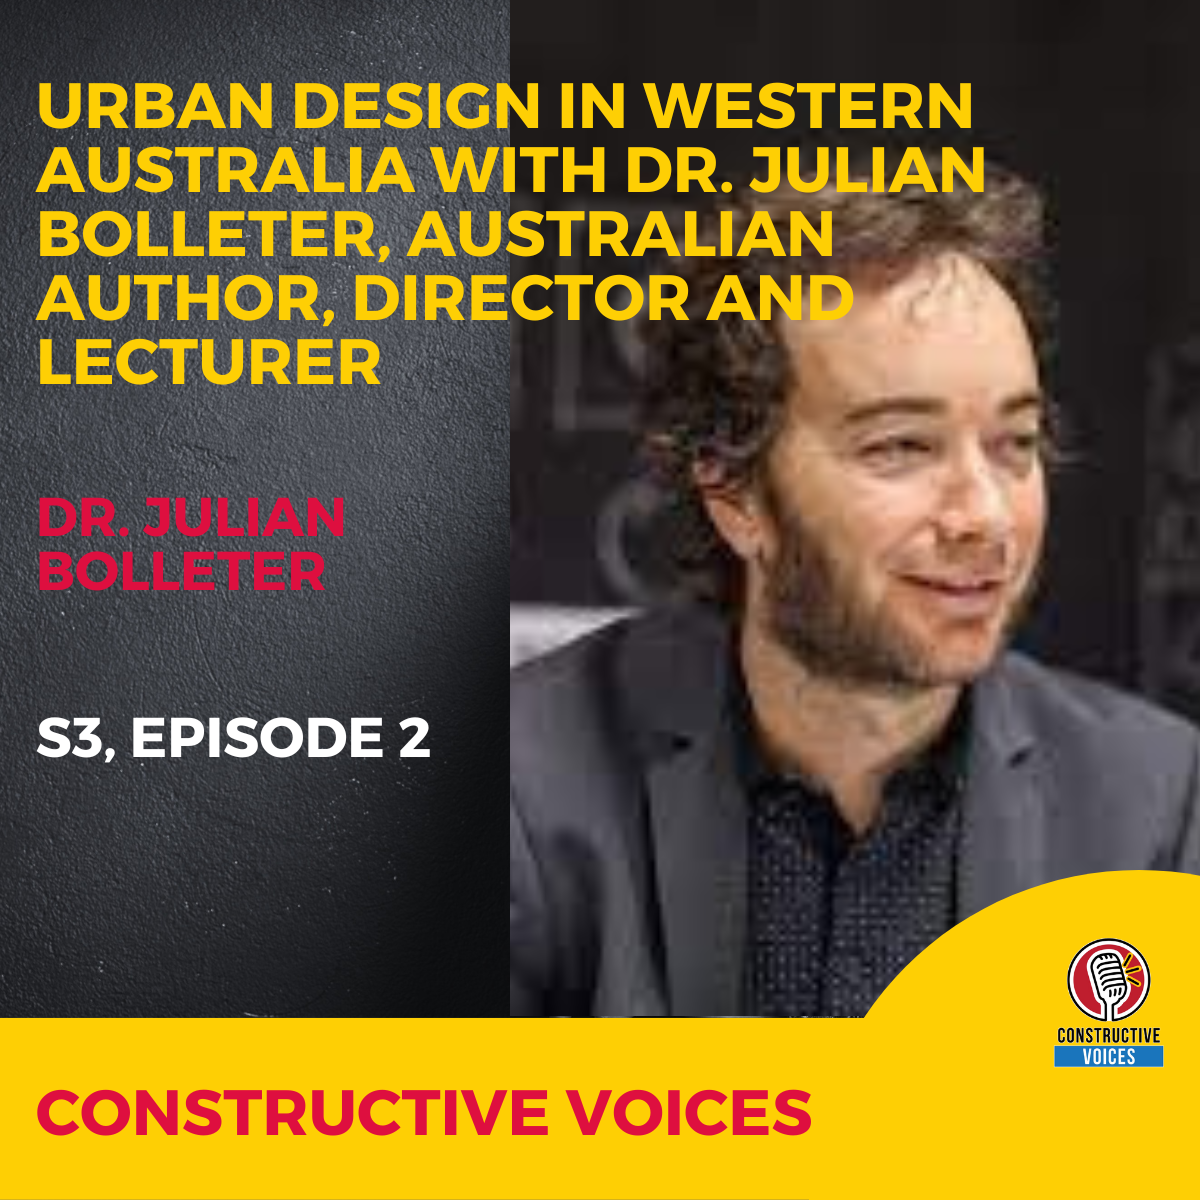 Urban Design in Western Australia With Dr.Julian Bolleter, Australian Author, Director and Lecturer